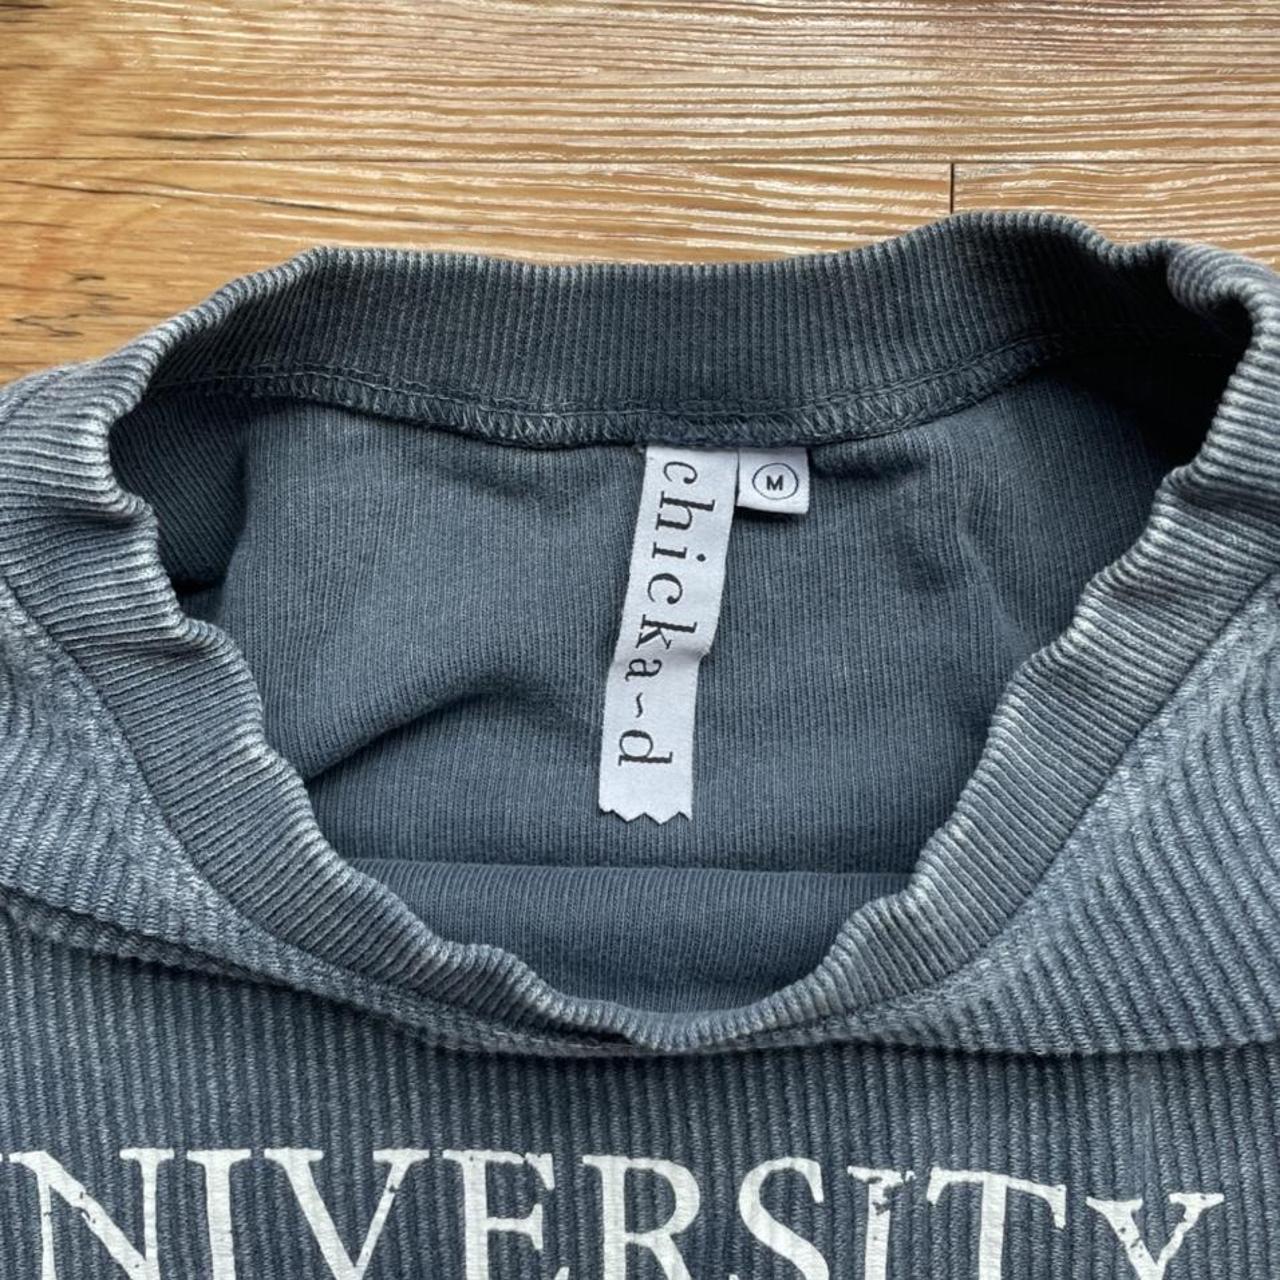 Product Image 3 - UPenn College sweatershirt
☑️ authentic ~